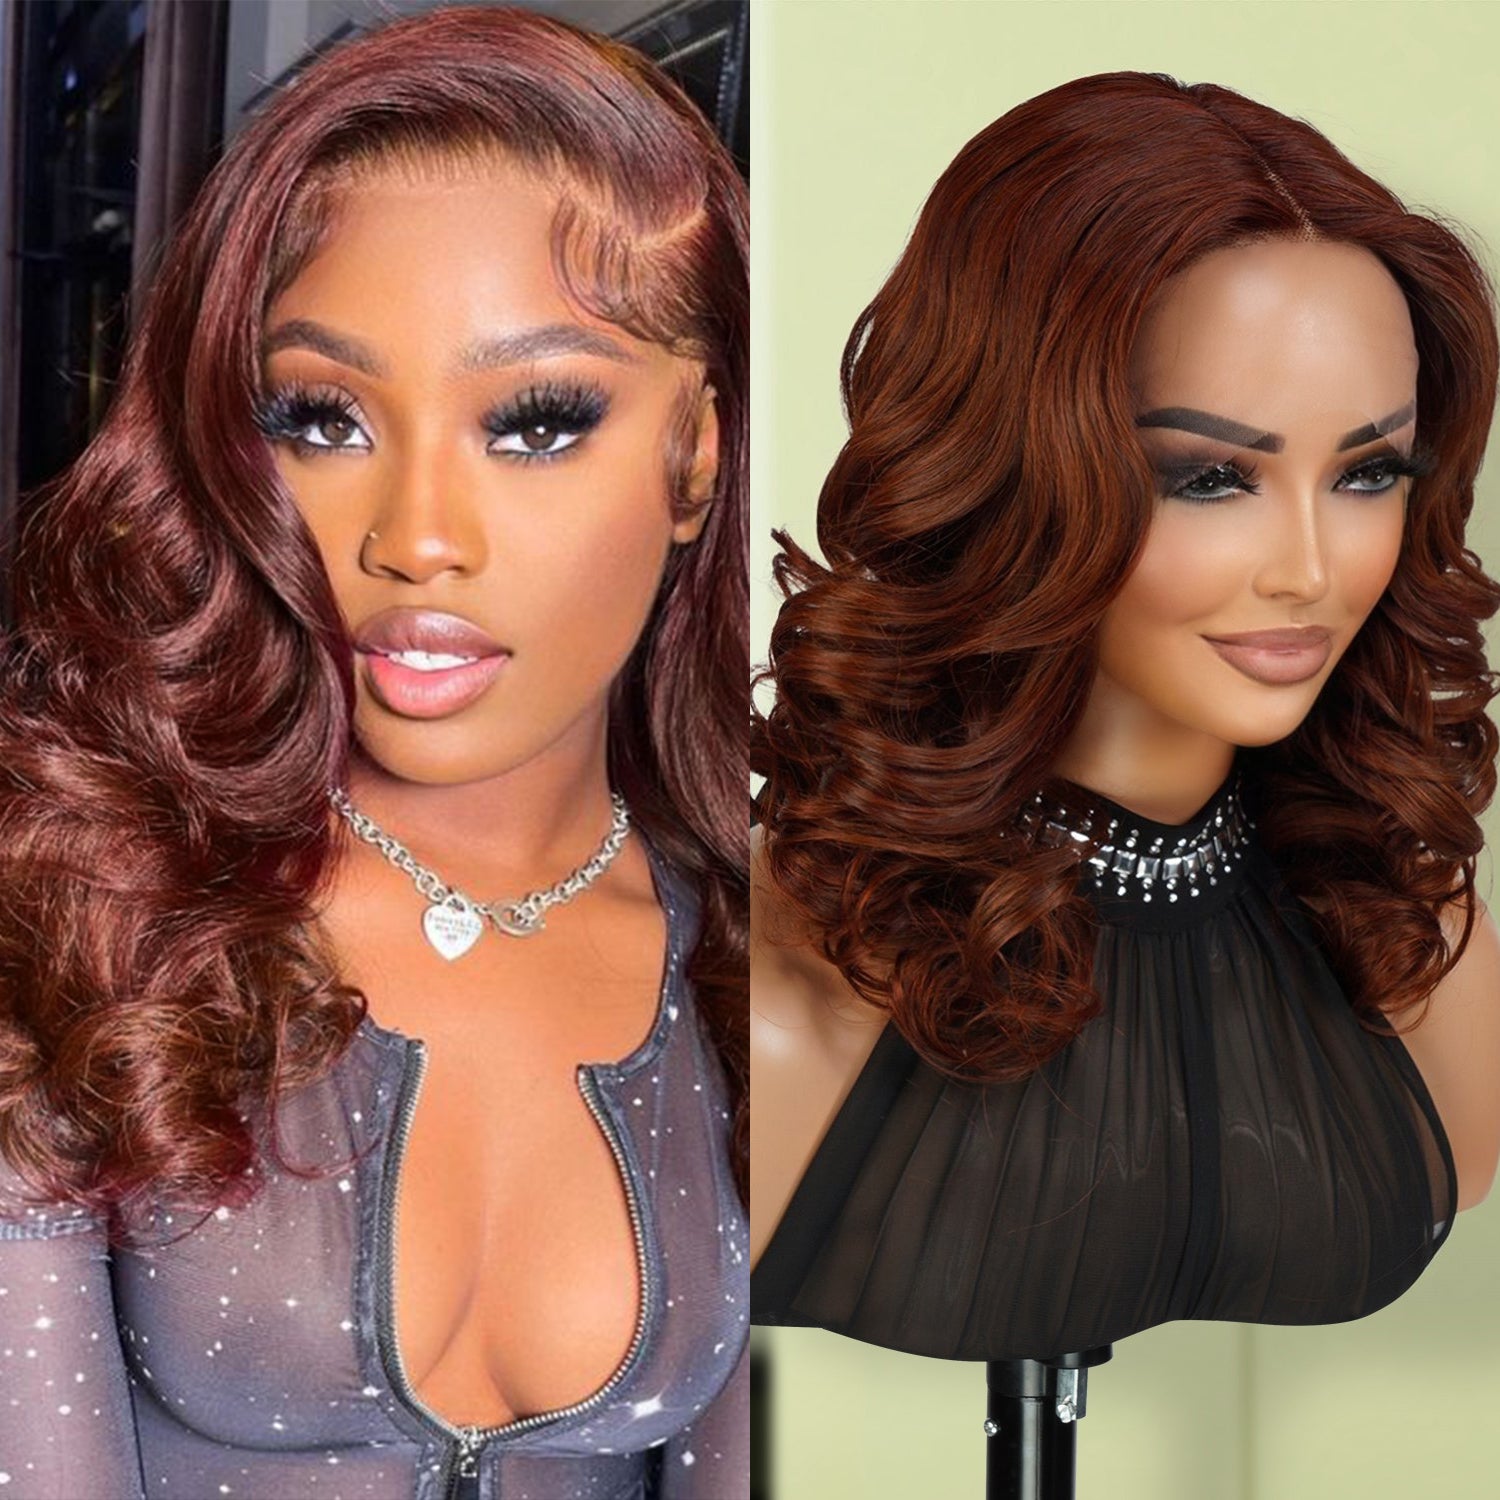 This wig is wearable right out the box so you don’t need to know a lot about wig styling to wear the T part, It is a salon-quality that doesn't require any further steps. Just wear and go, Natural Looking, Soft, Heathly, Tangle Free & No Shedding, Low maintenance hair style, Pre-colored in Copper brown by expert.